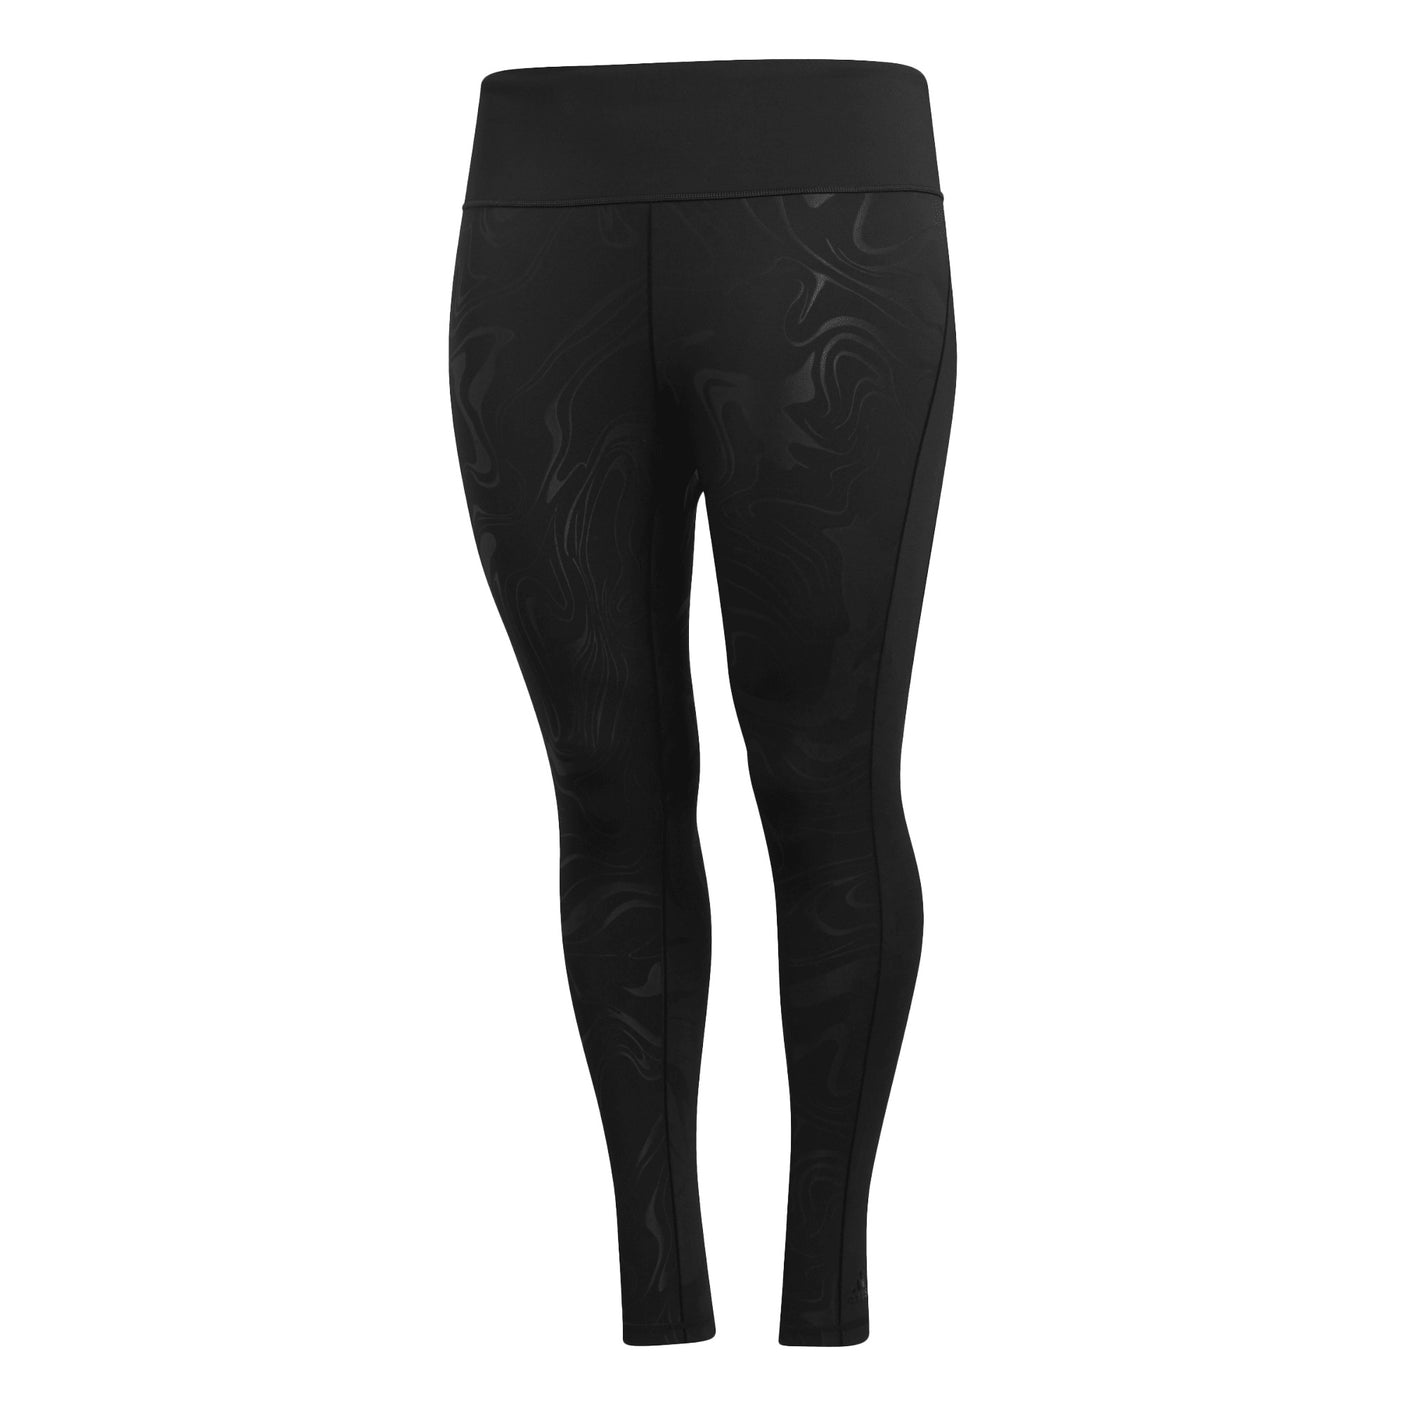 adidas Women's Believe This Glam On Long Tights (Plus Size) Black Front